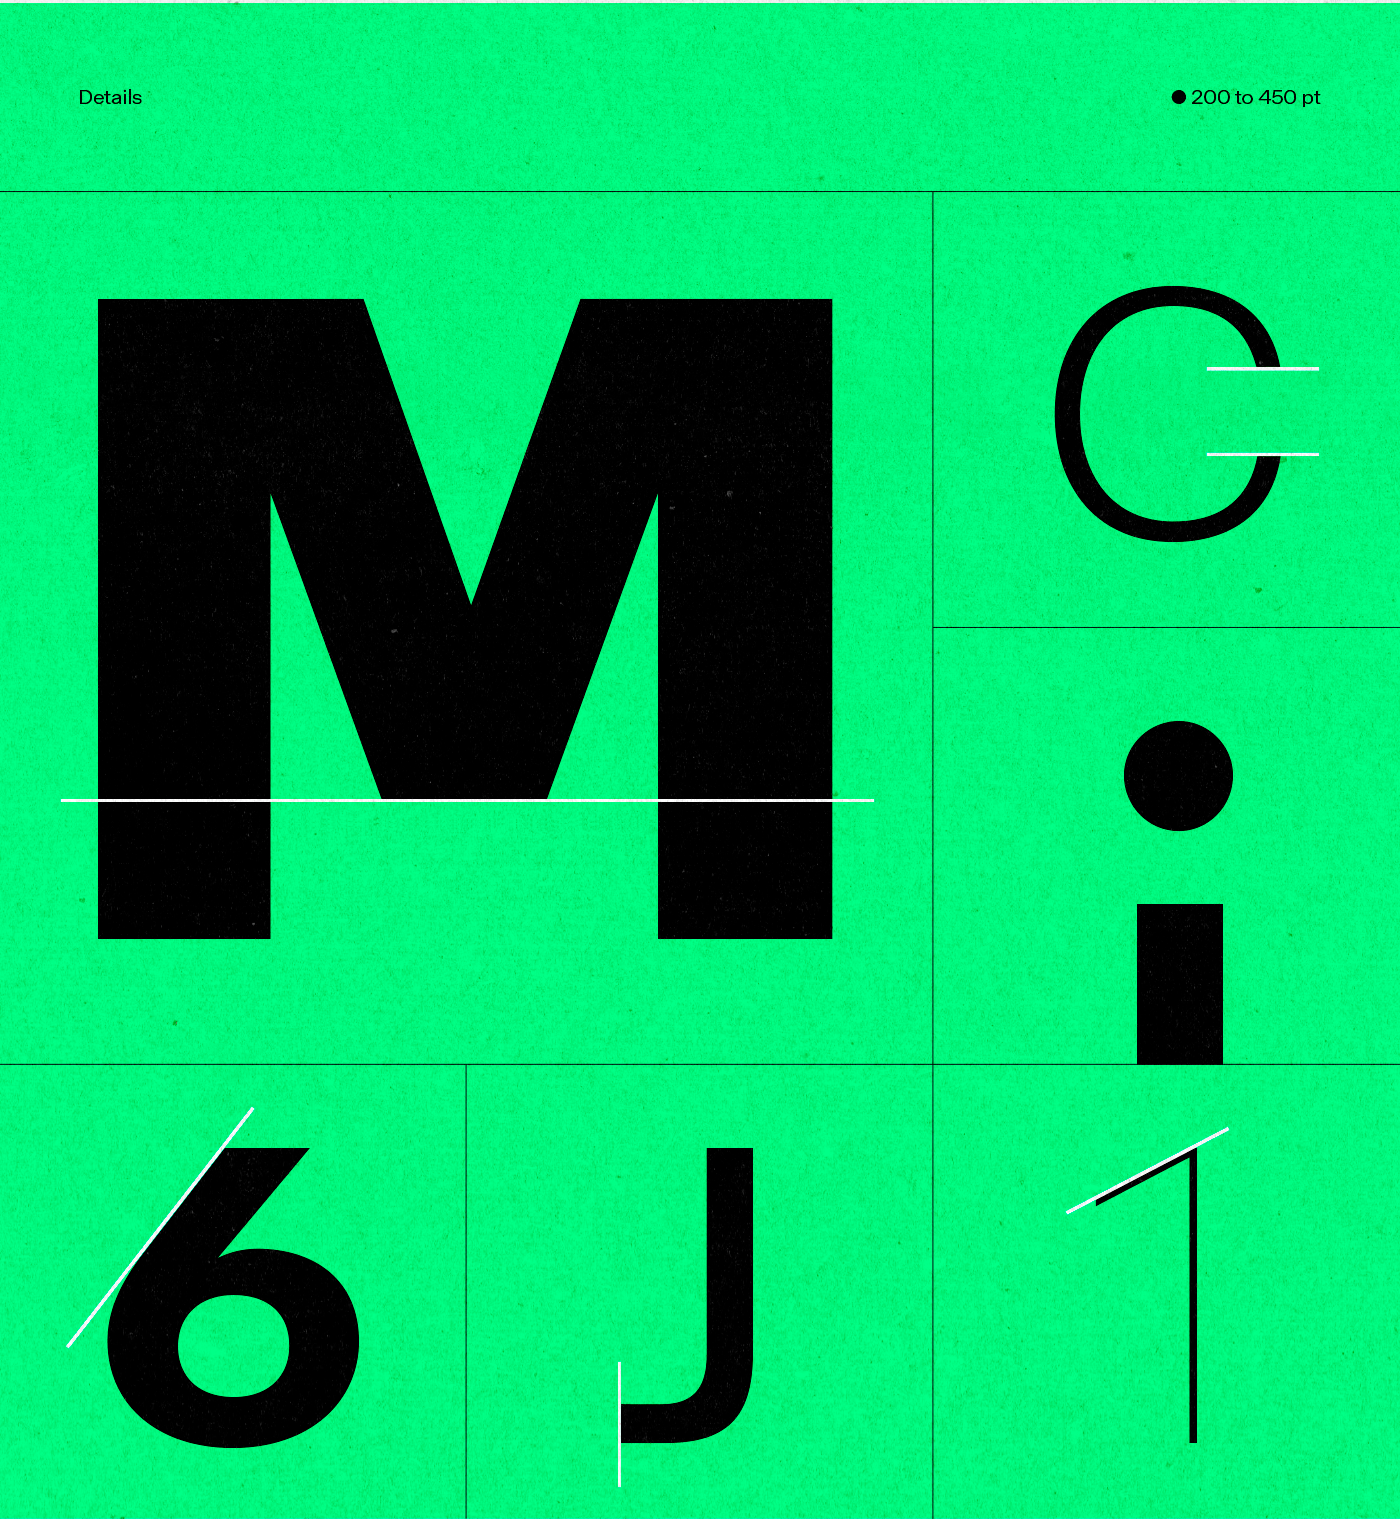 barcelona font modern new sans trials type Typeface variable